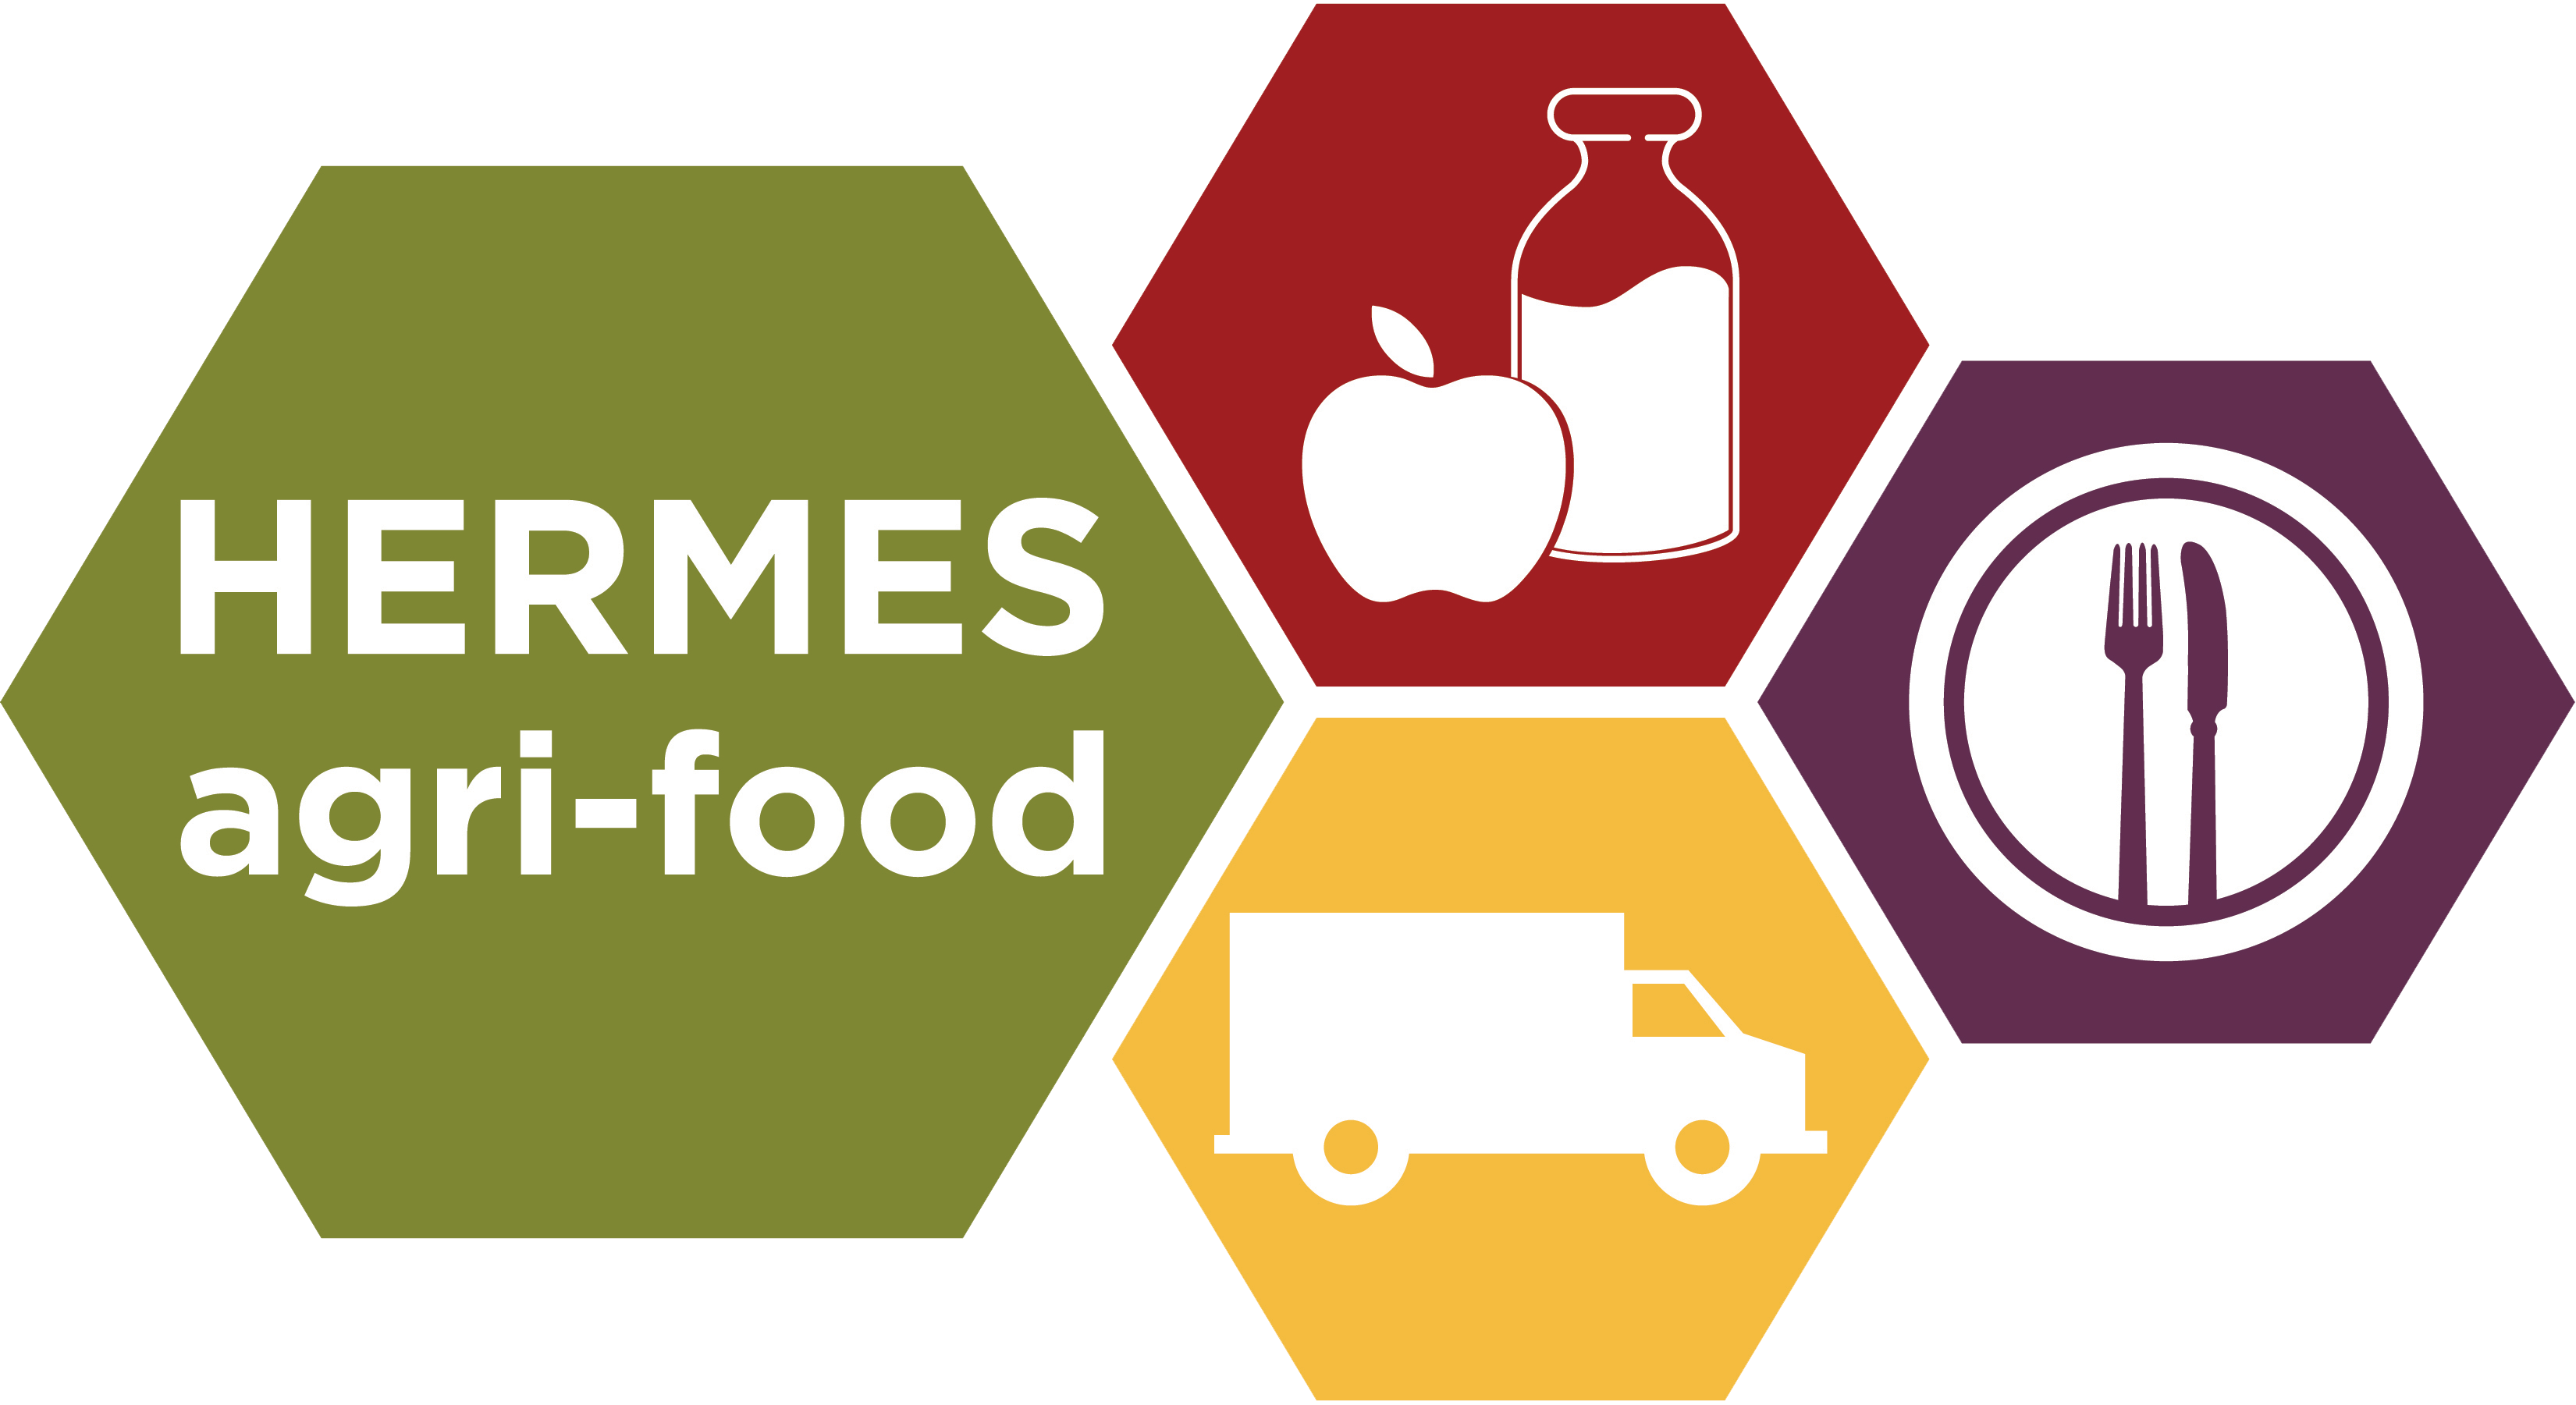 grains clipart gofoods